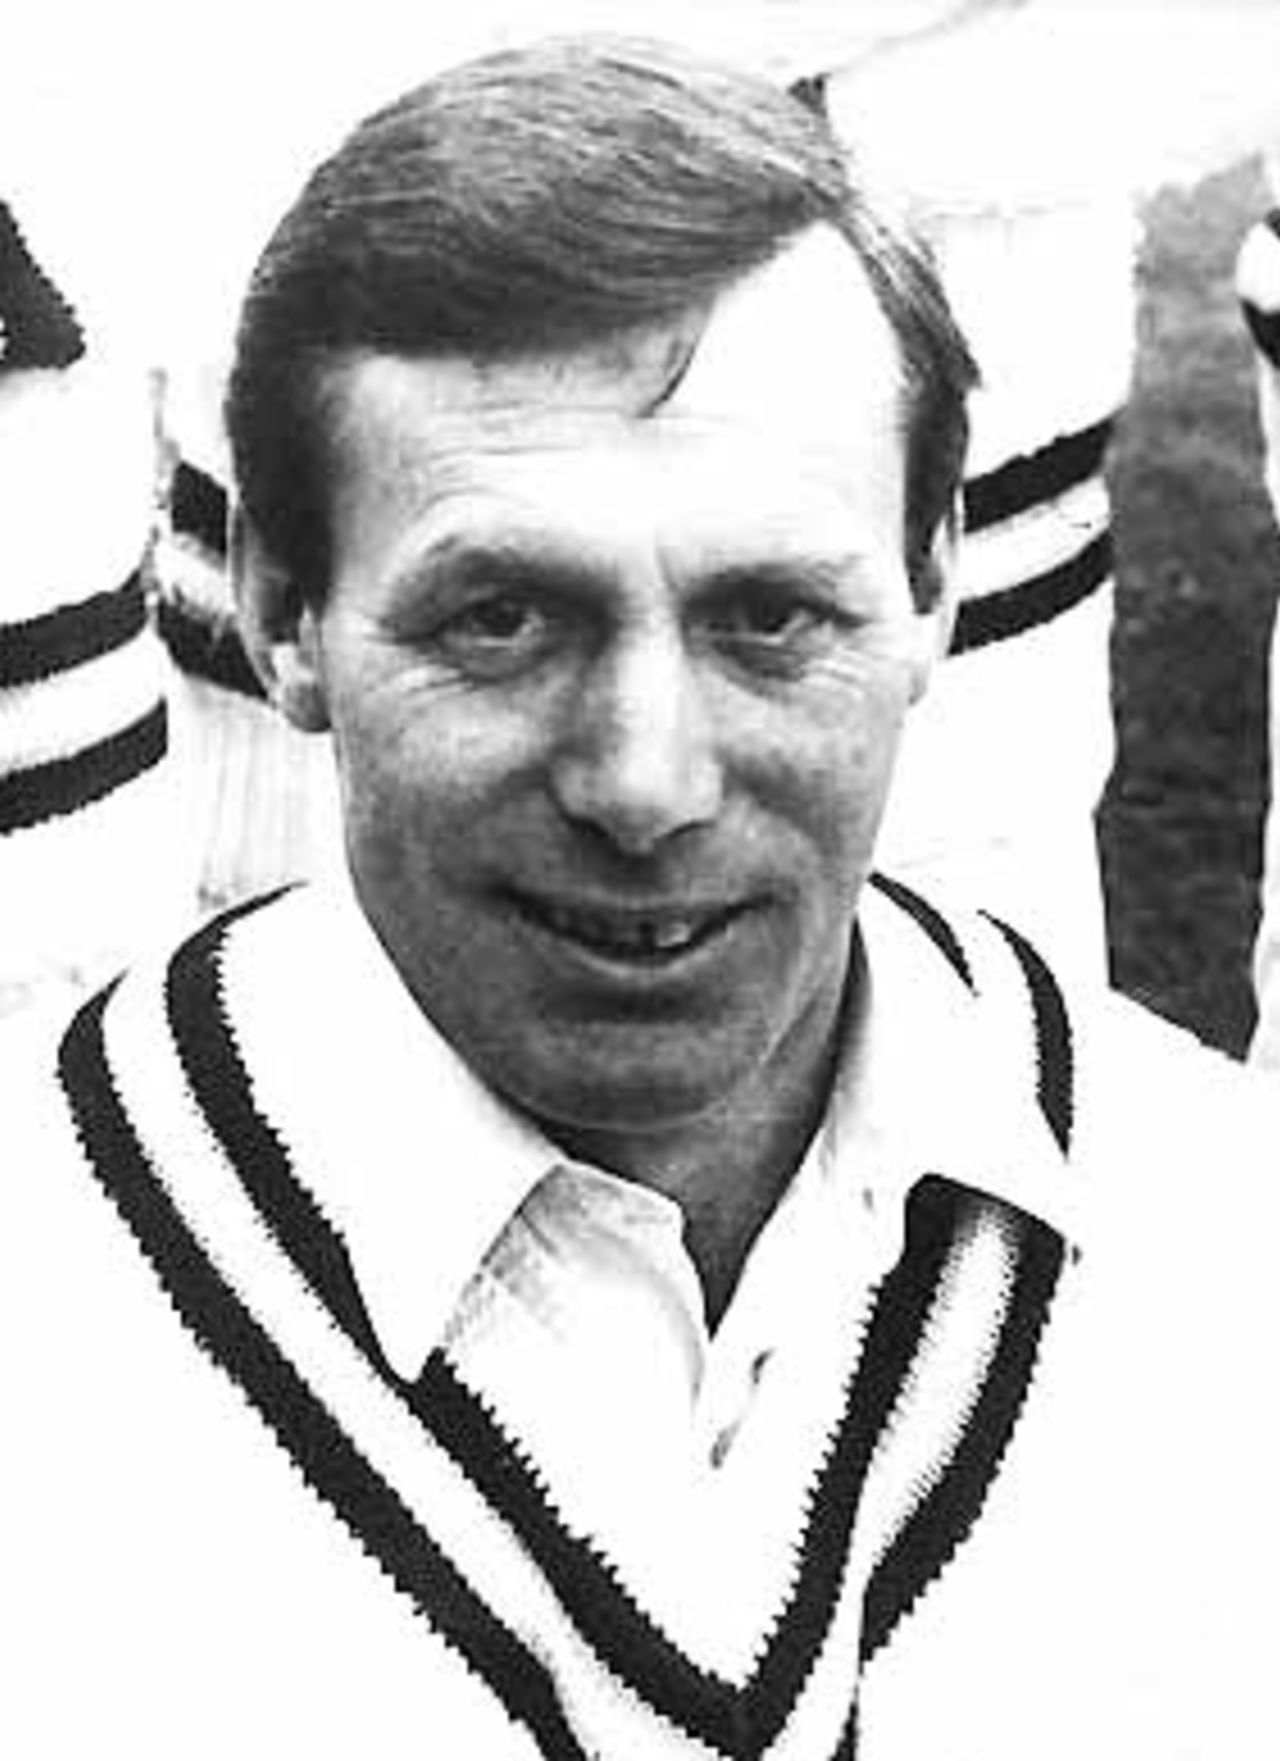 Peter Sainsbury who played for Hampshire for more than two decades